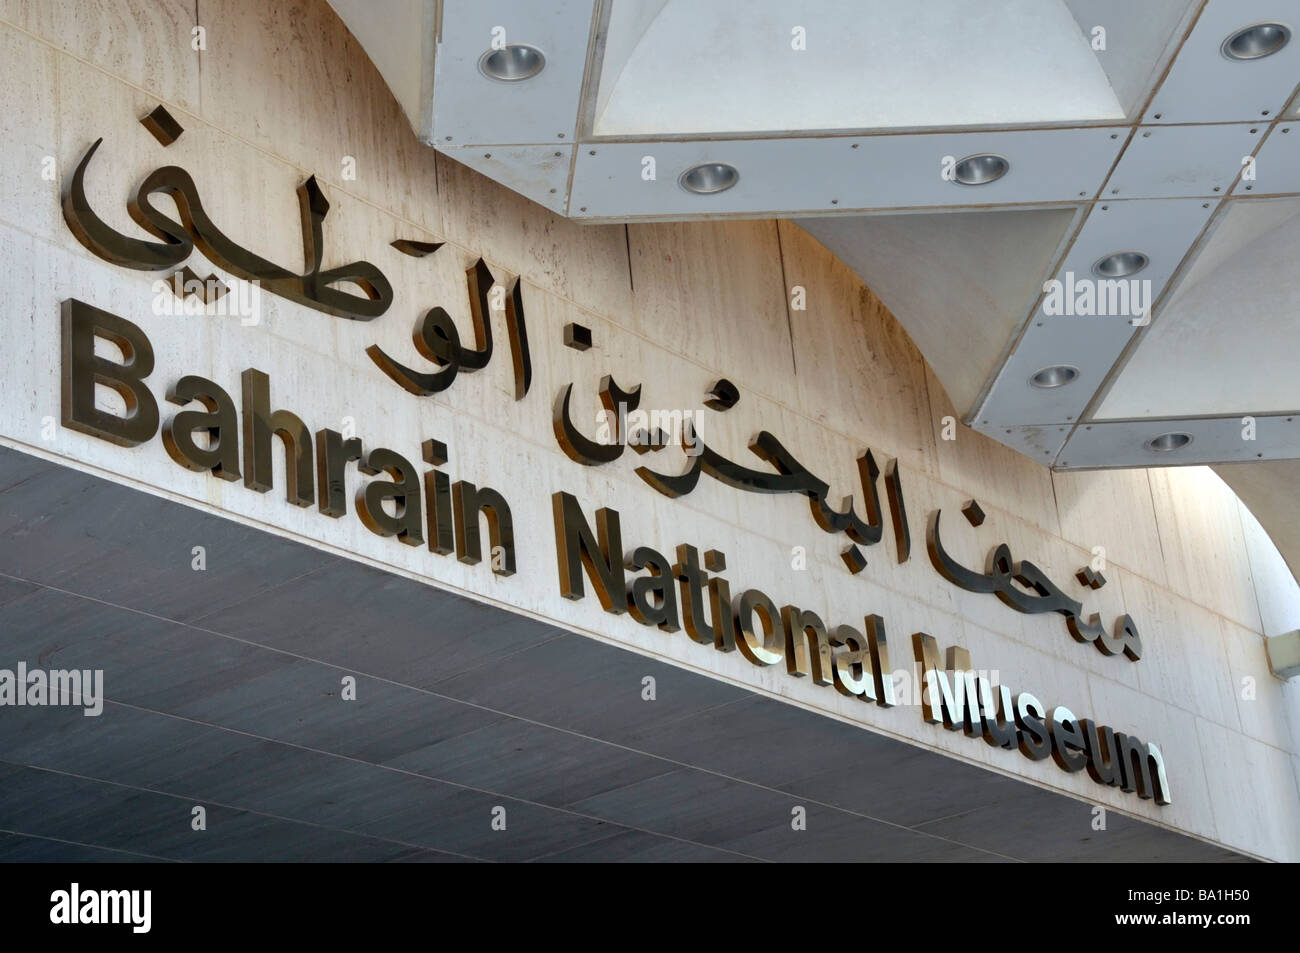 Bahrain bilingual sign above entrance to Bahrain National Museum Stock Photo